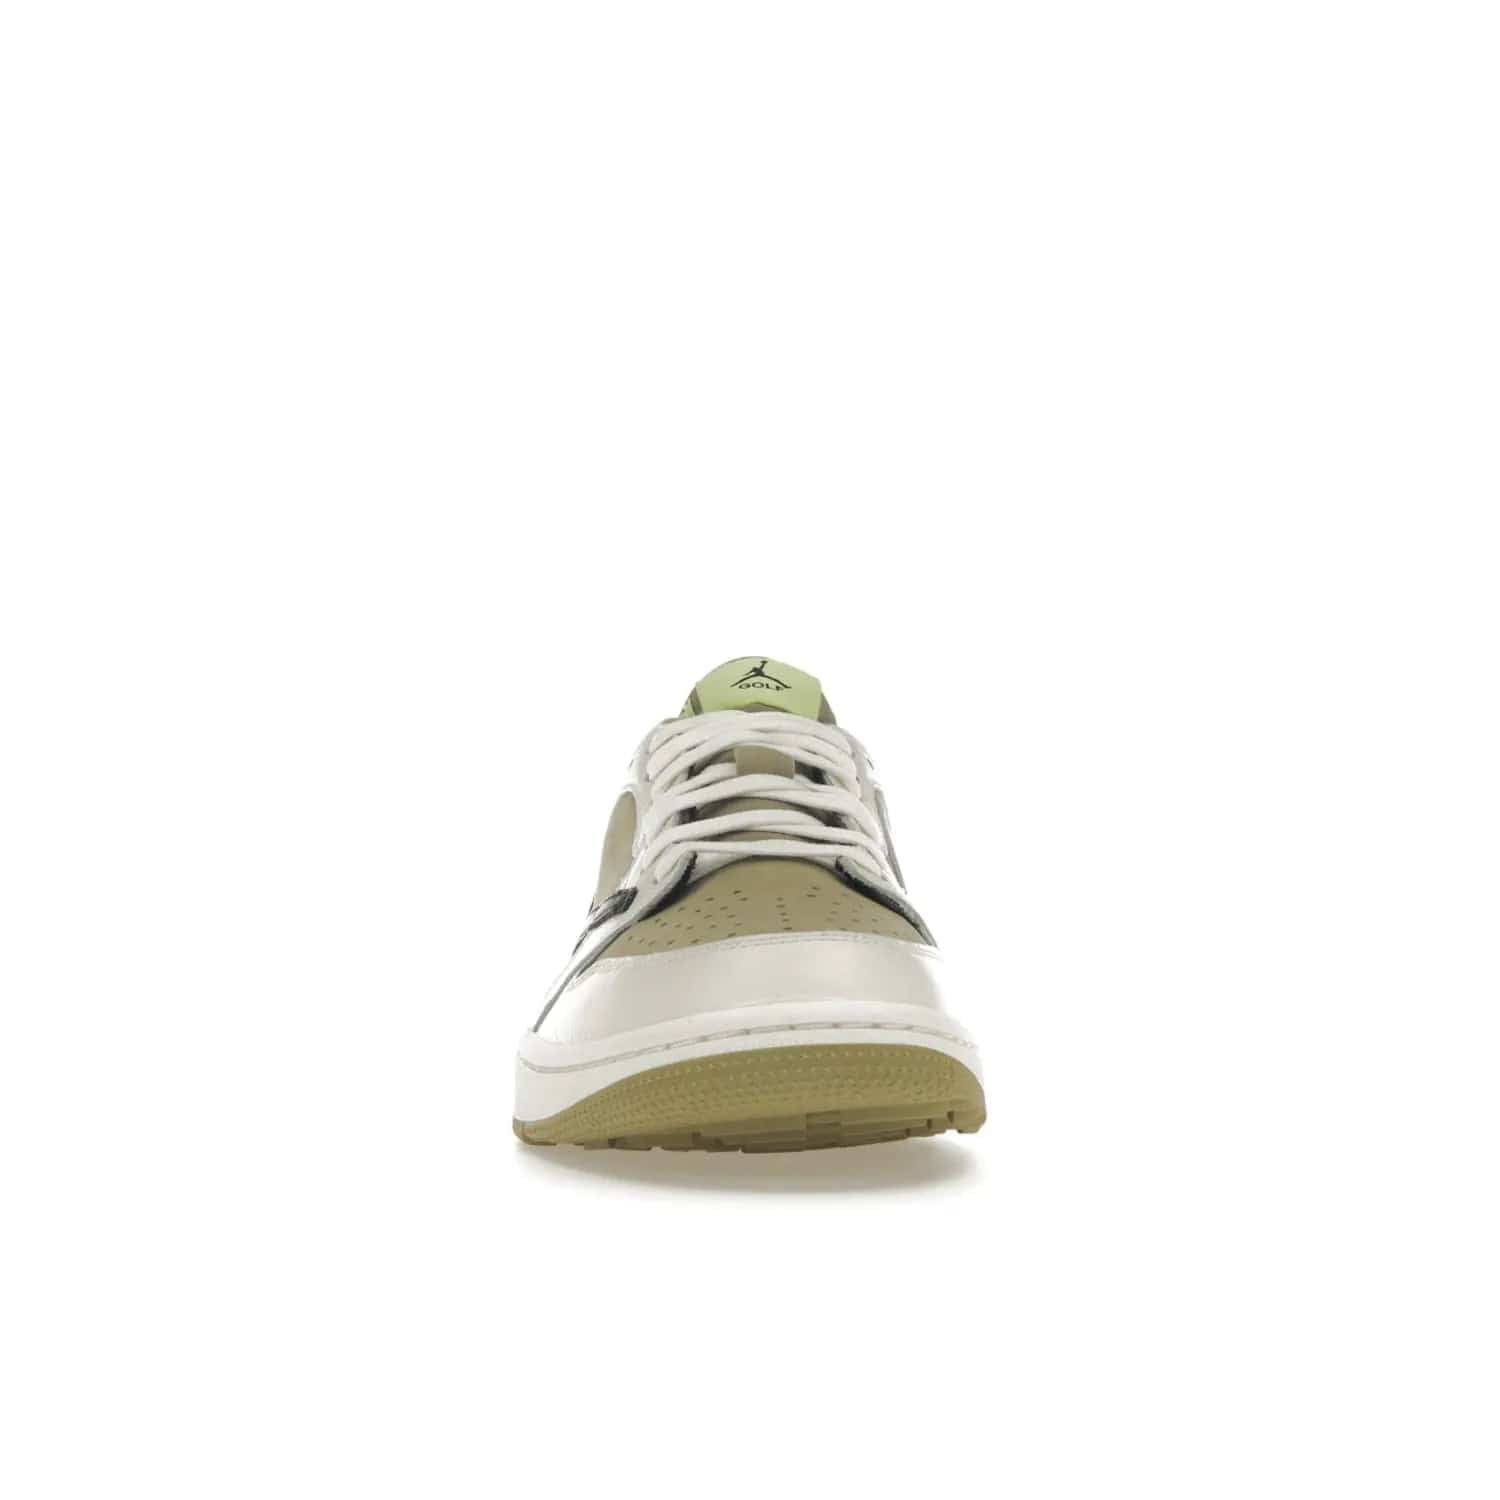 Jordan 1 Retro Low Golf Travis Scott Neutral Olive - Image 10 - Only at www.BallersClubKickz.com - Explore the unique Jordan 1 Retro Low Golf Travis Scott Neutral Olive, an olive-green sneaker collaboration between the iconic Jordan Brand and music royalty, Travis Scott. This special pair is tailored for the golf course with altered traction, hardened rubber, and a sleek style perfect for everyday wear. Get your pair and impress the crowd with its signature earth tones.